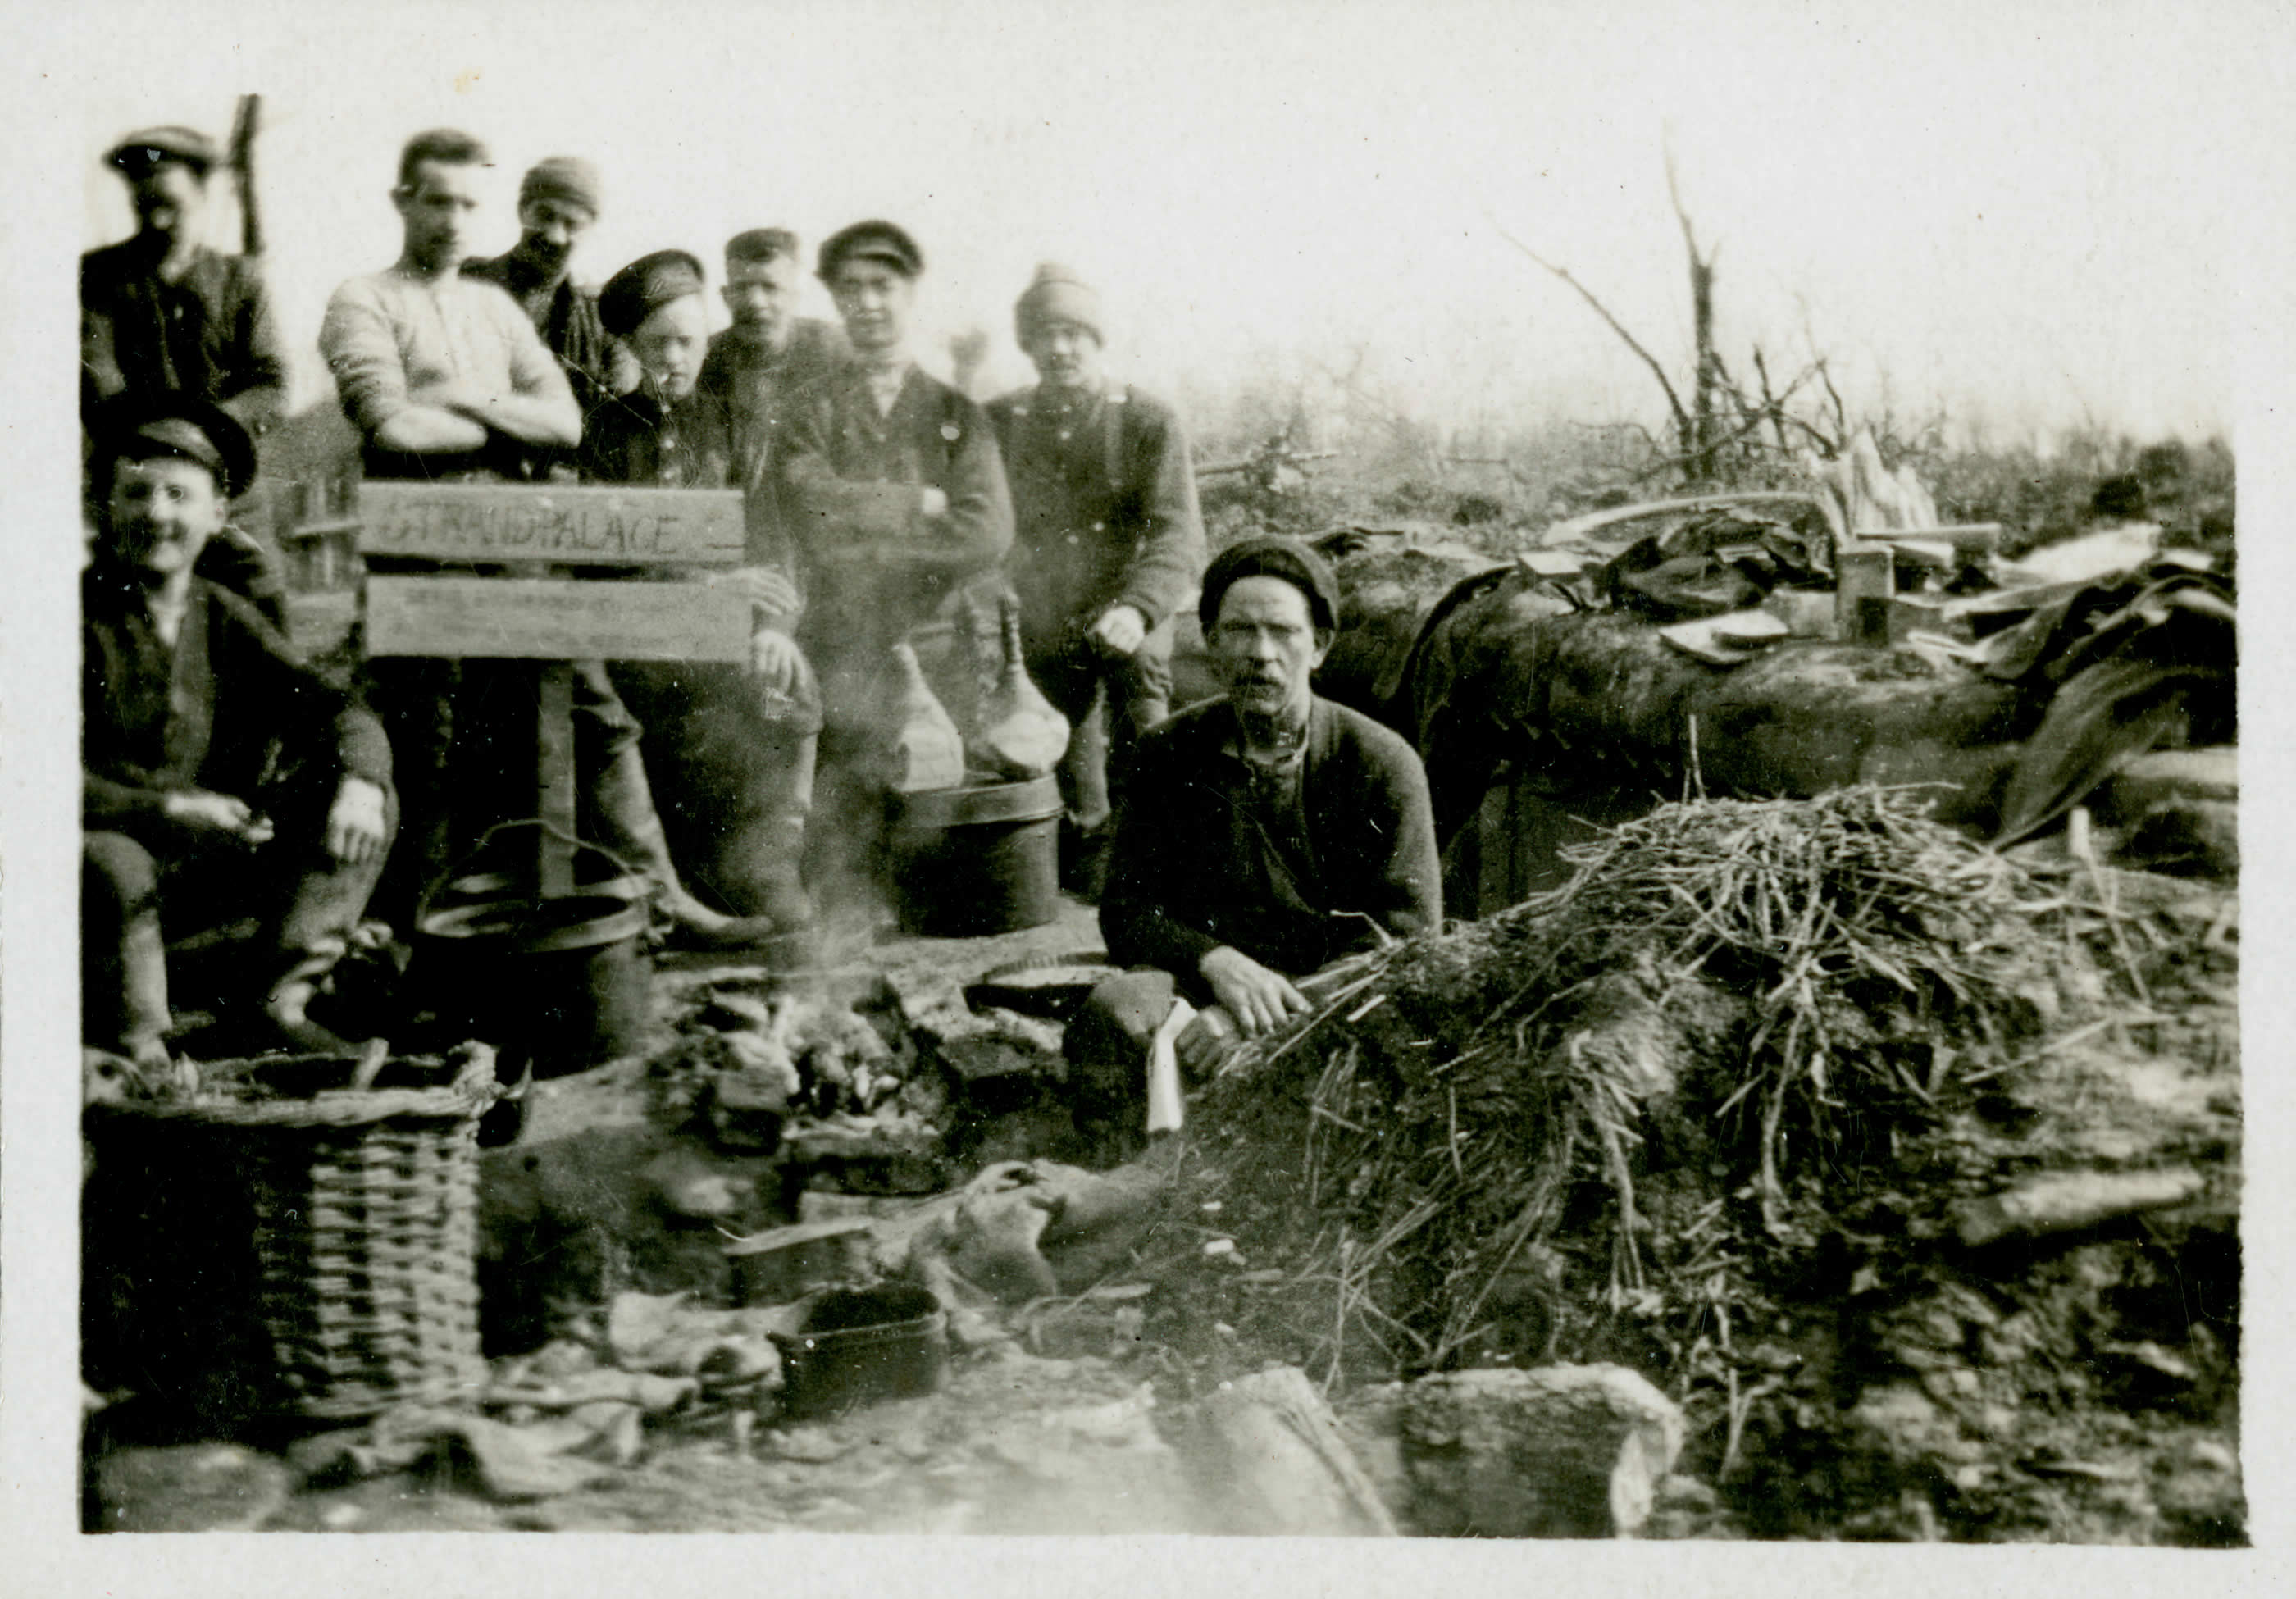 Canadian soldiers in the trenches